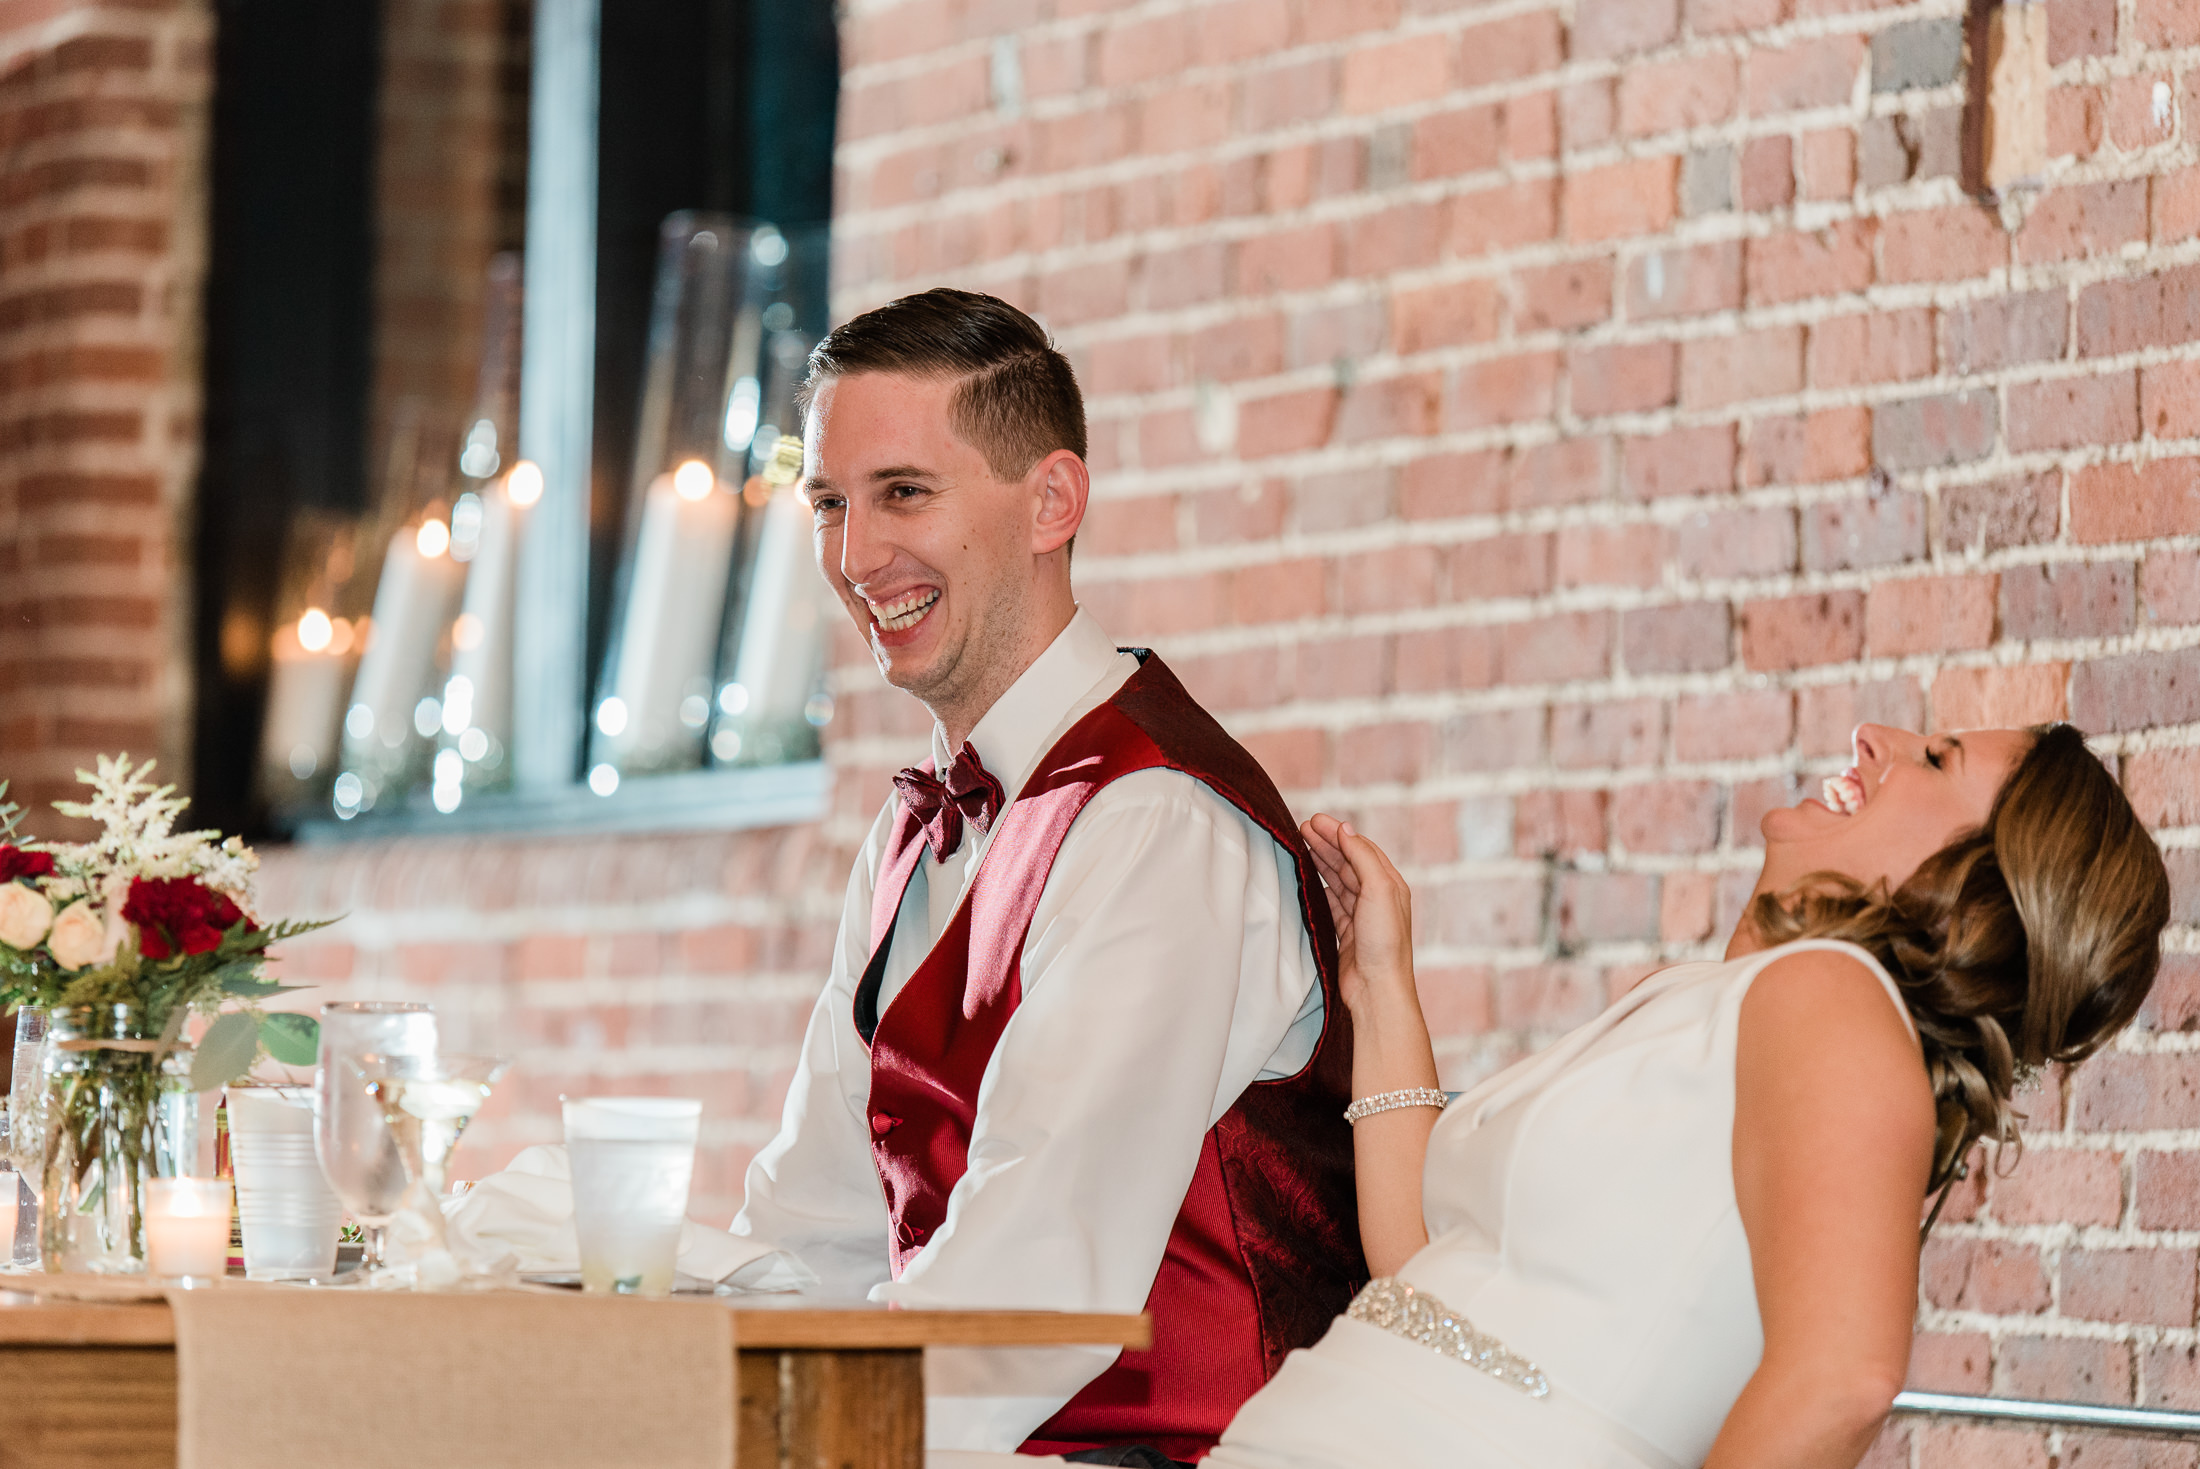 Reactions to a wedding toast at Charles river museum wedding in Waltham MA